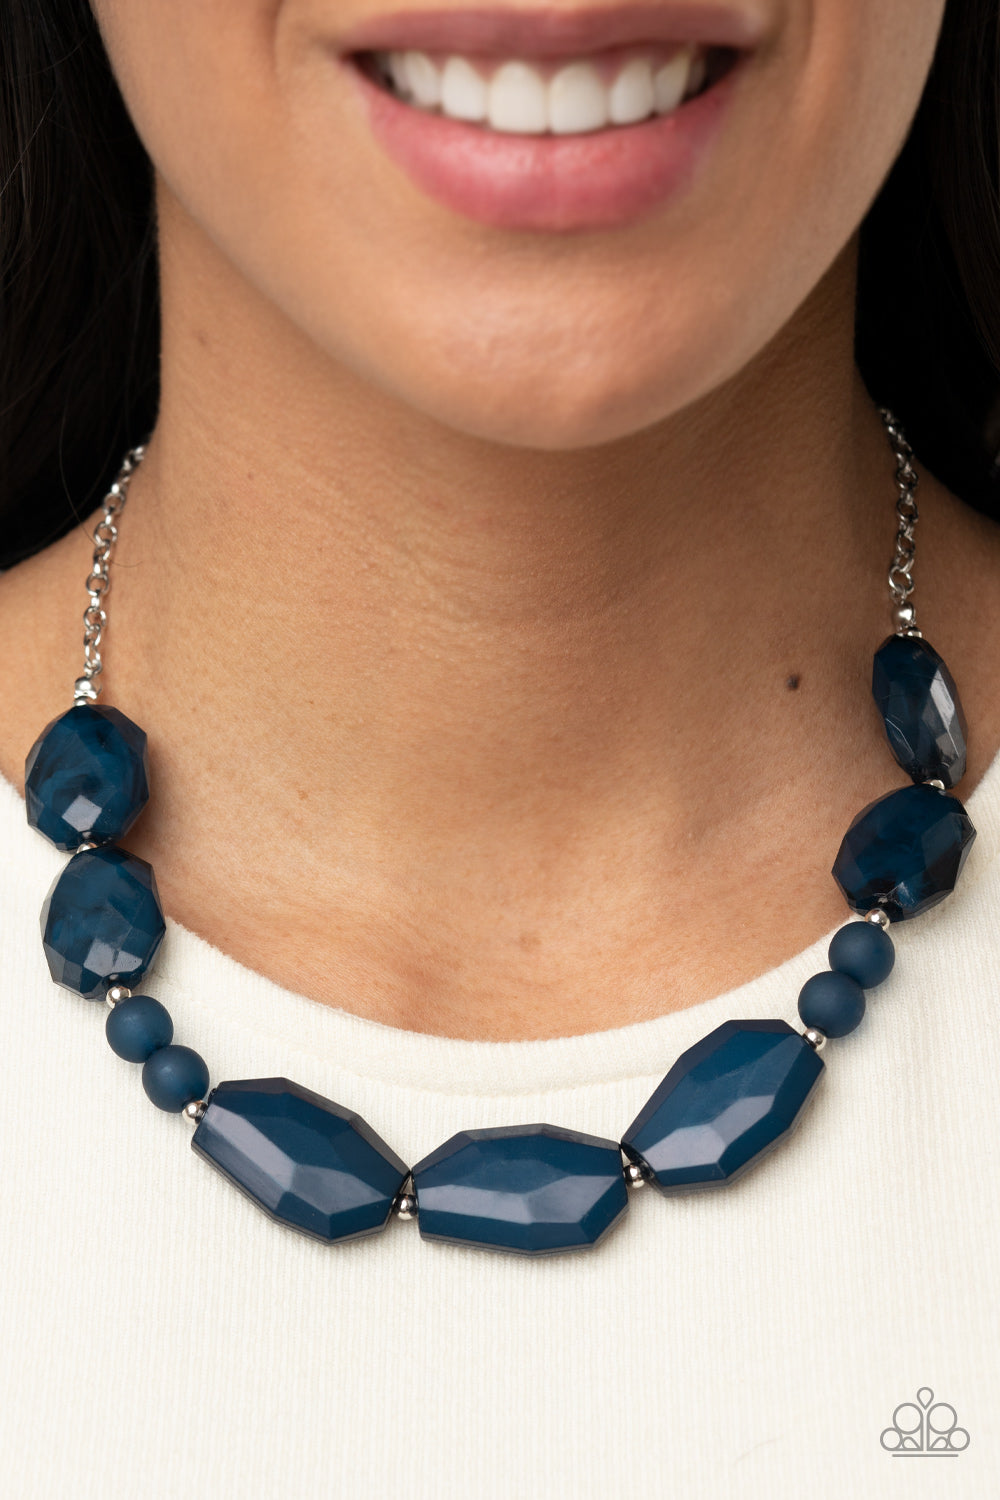 Melrose Melody - Blue Faceted Bead Necklaces - Paparazzi a series of opaque and cloudy faceted Navy Blue gem-like beads are threaded along an invisible wire. Dainty silver beads add shining accents as they traverse across the collar on a silver chain in a classically melodic display. Features an adjustable clasp closure.  Sold as one individual necklace. Includes one pair of matching earrings.  Paparazzi Jewelry is lead and nickel free so it's perfect for sensitive skin too!